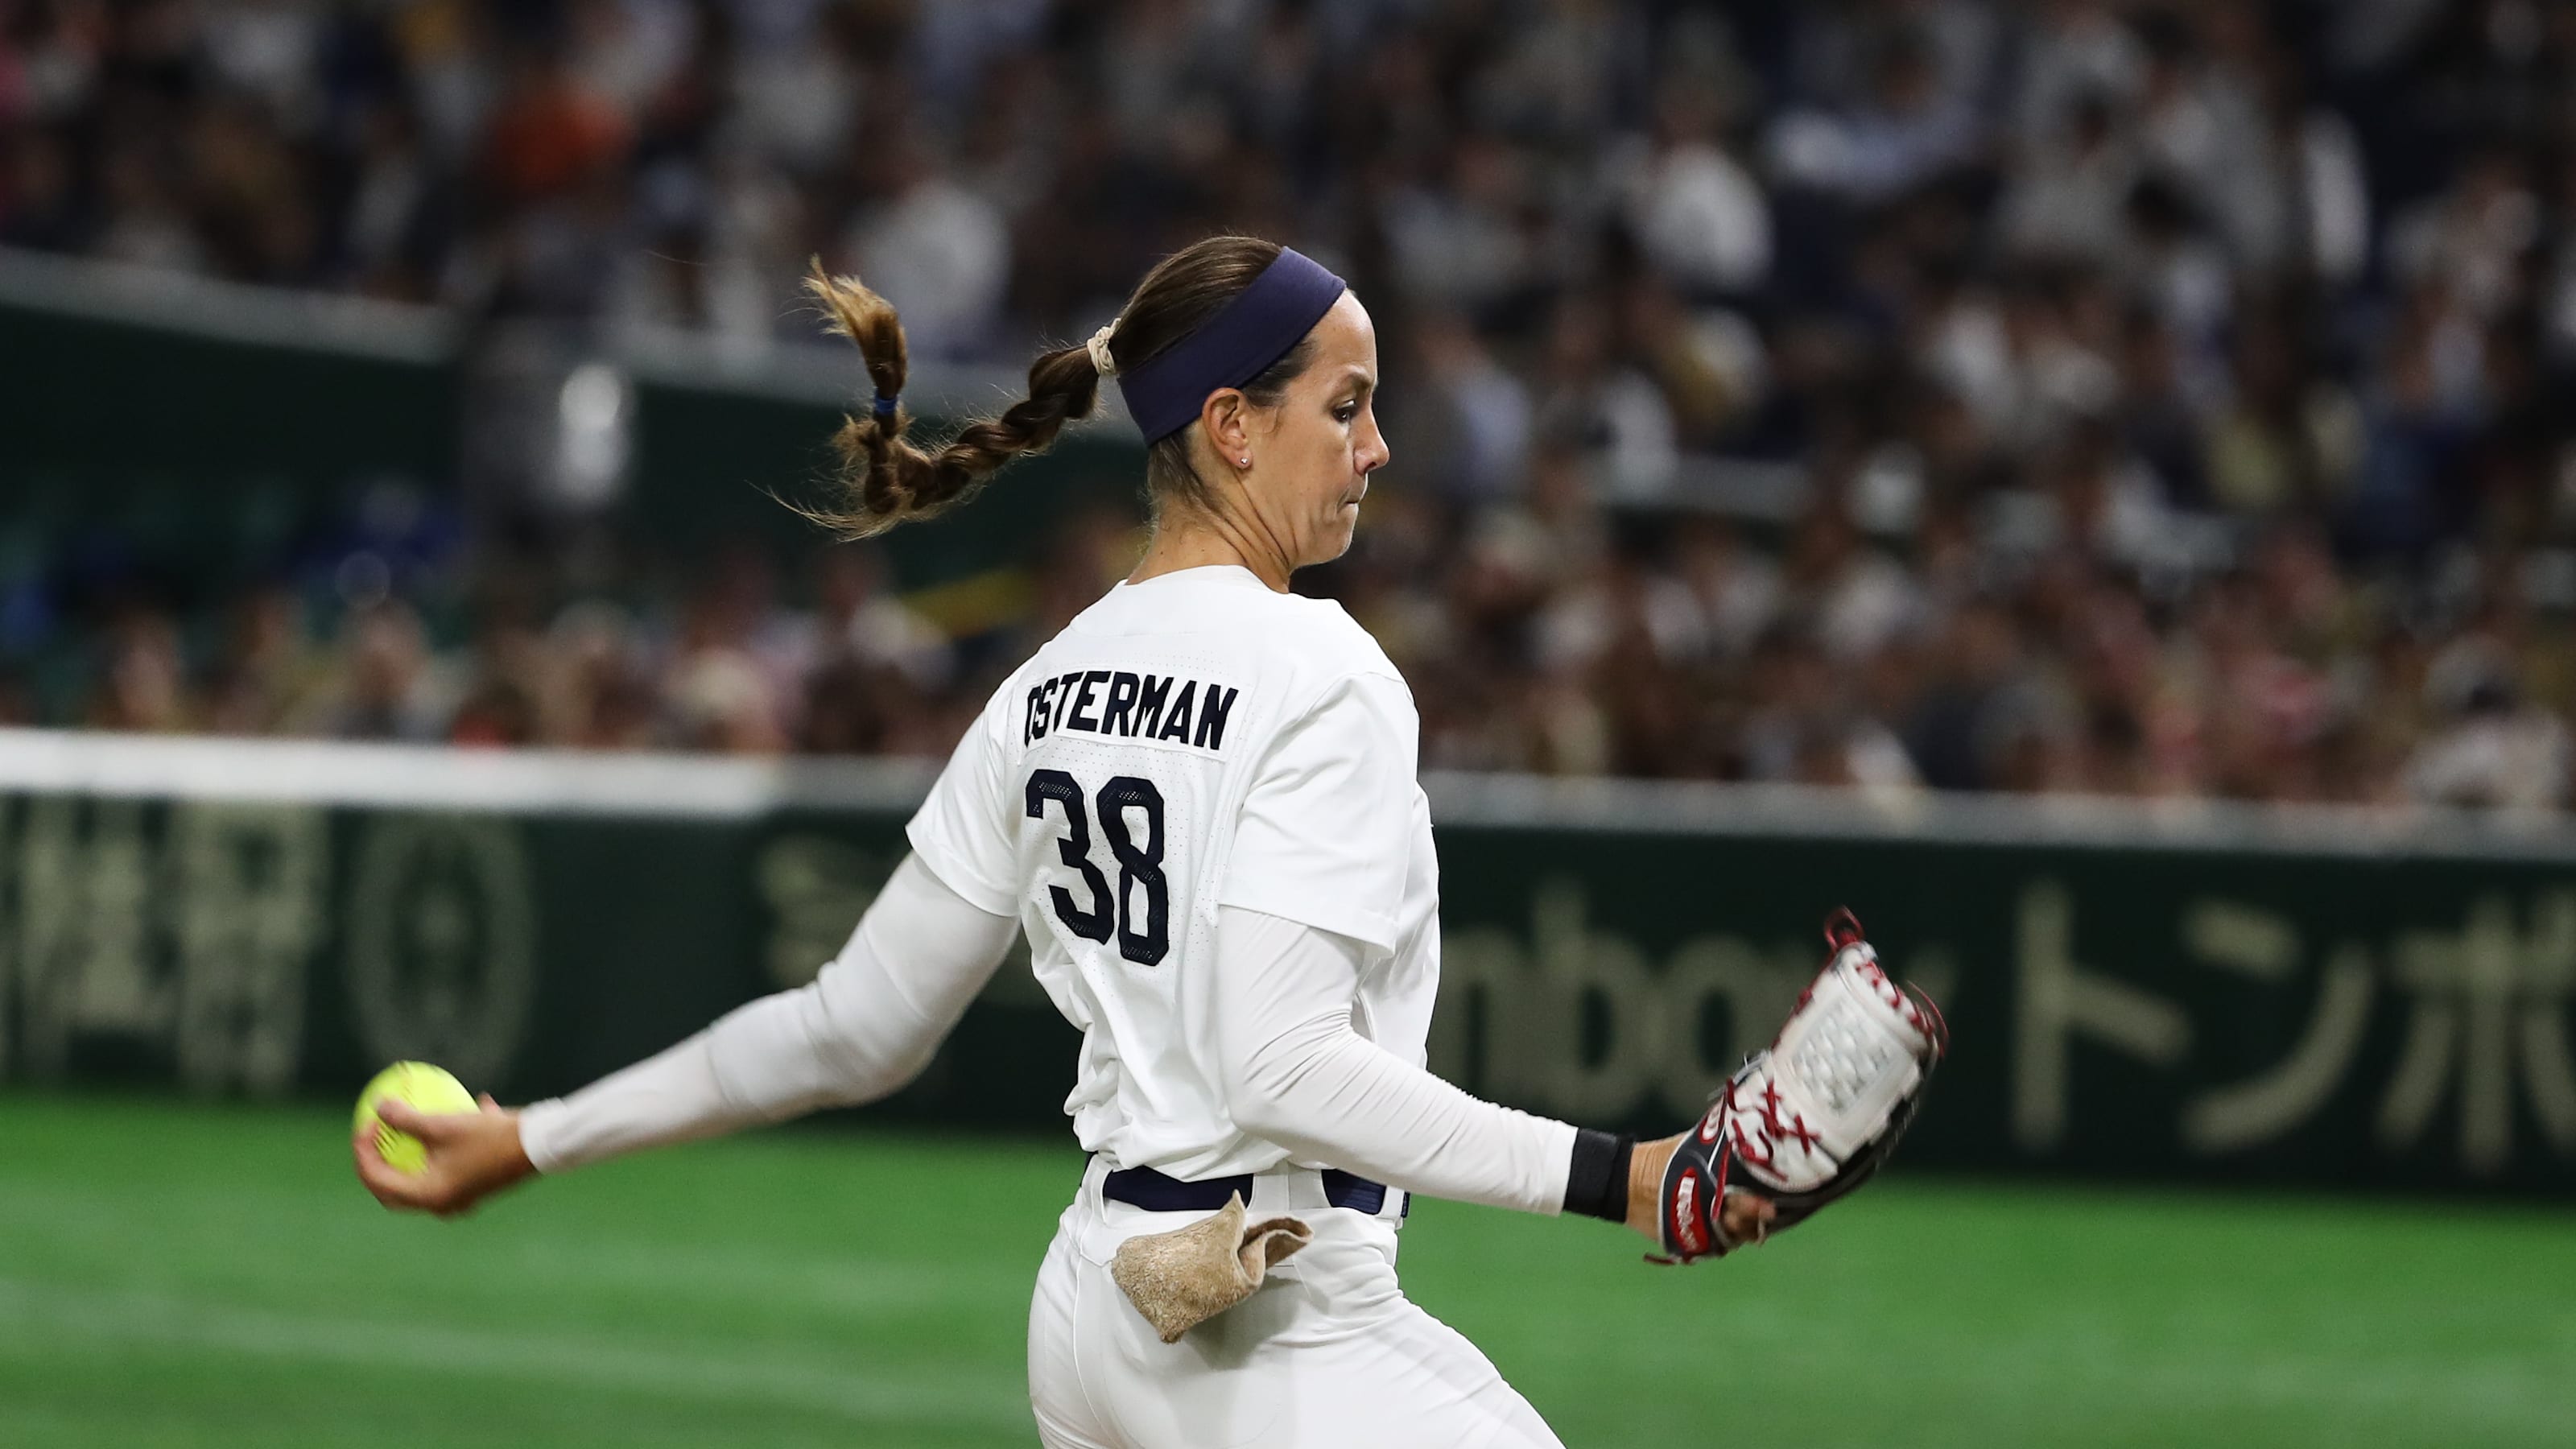 Olympic Softball At Tokyo 2020 Top Five Things To Know